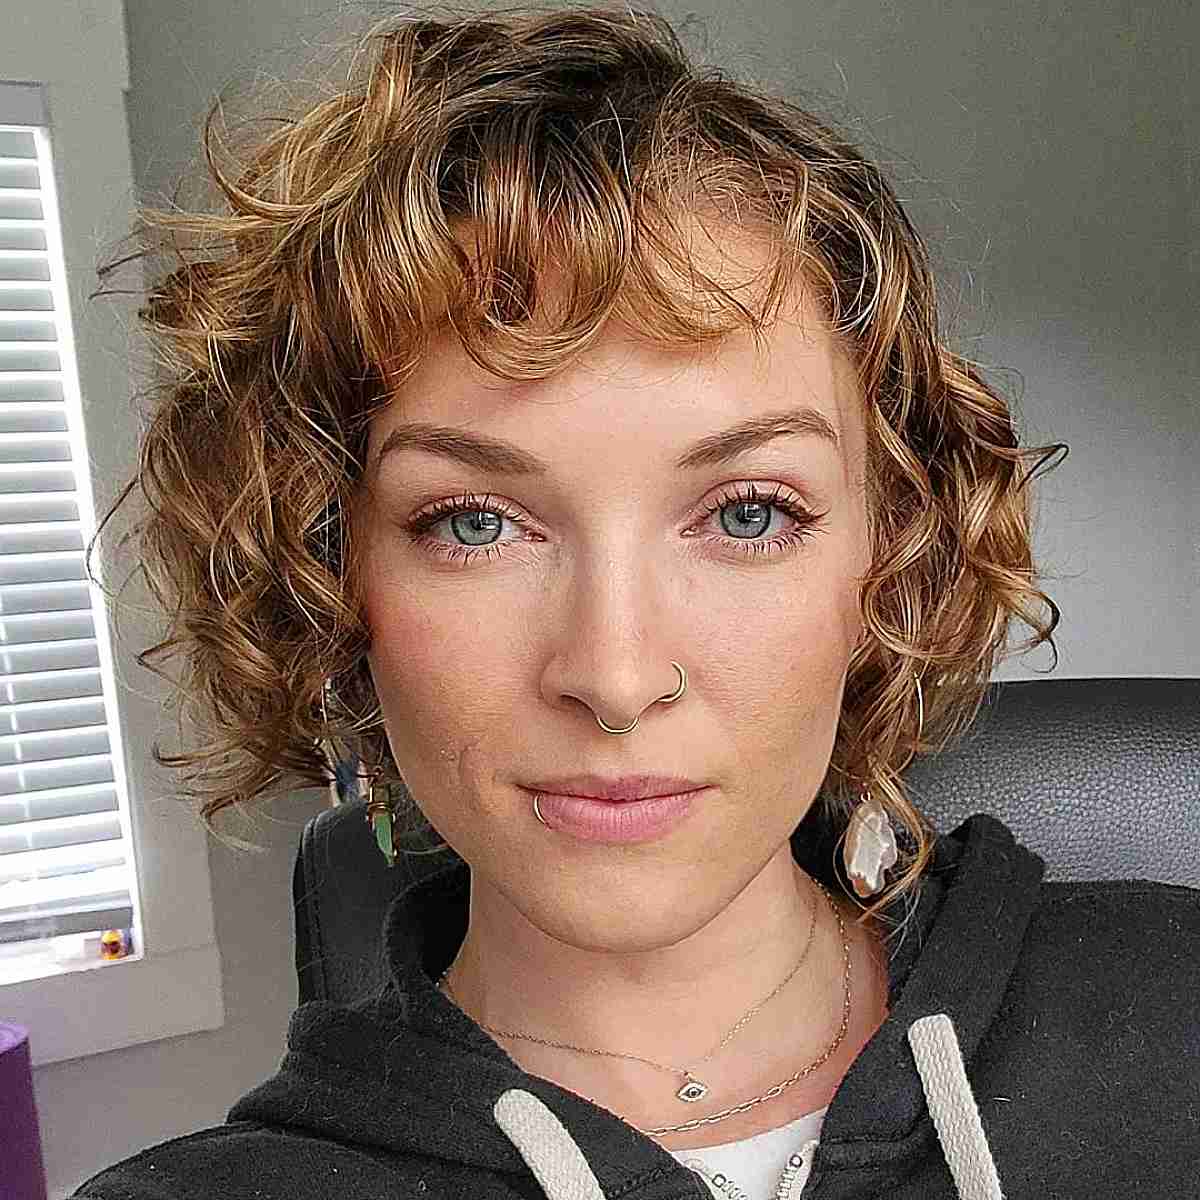 Loose curly wavy hair with a chin length side part asymmetrical cut